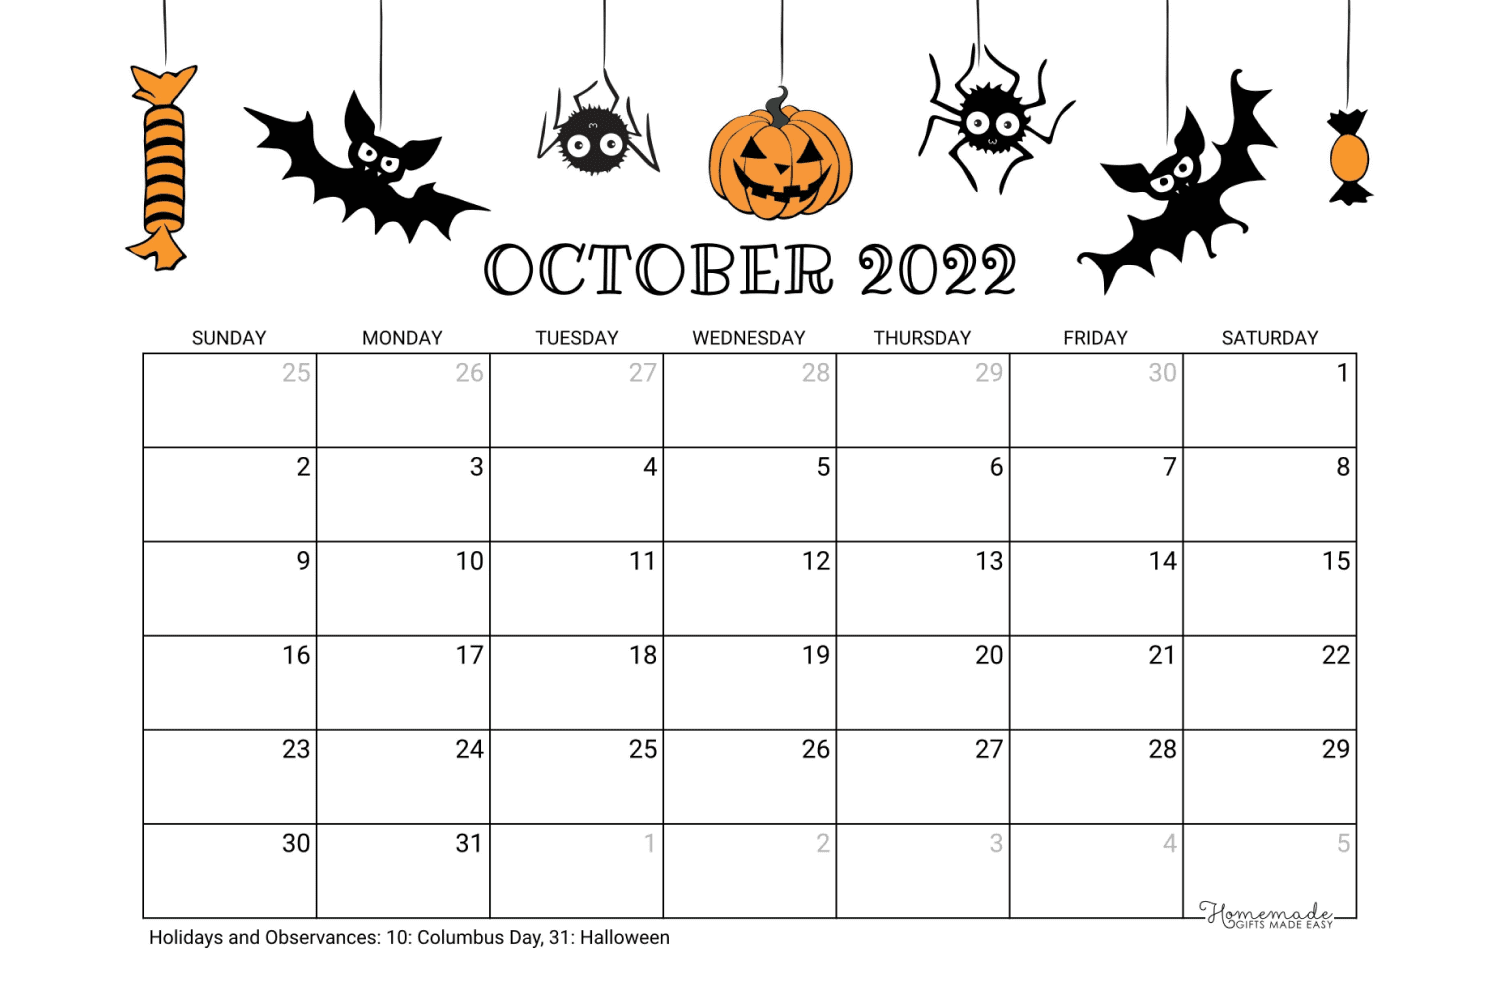 Calendar for October with the ability to write and funny pumpkins, spiders and bats for Halloween.